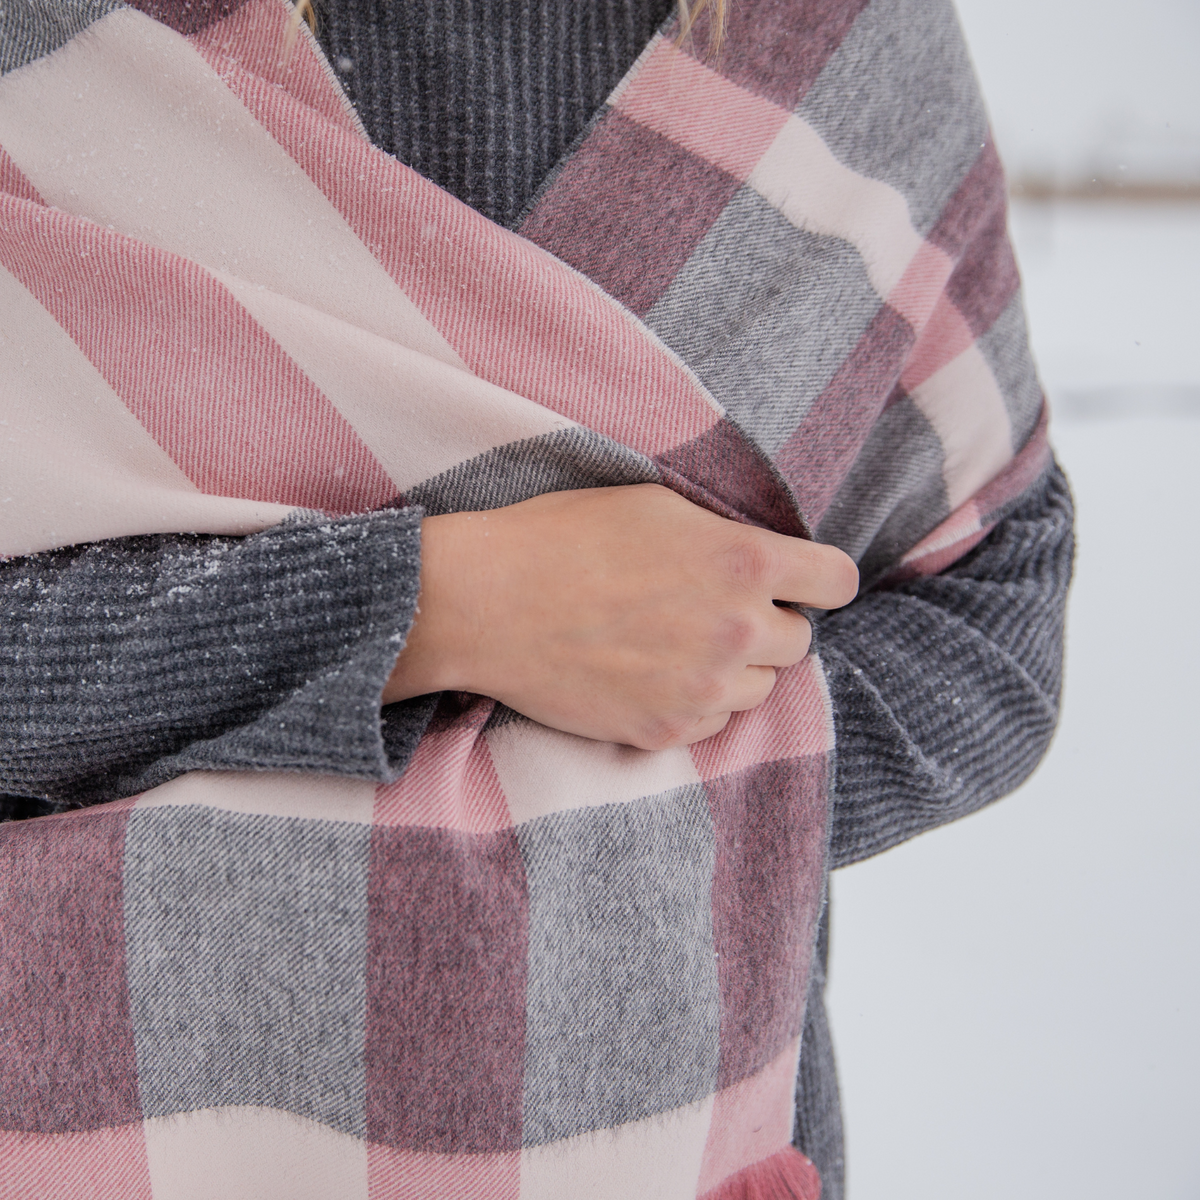 A close up photo of someone wearing a gray sweater and wrapping a scarf around them. The scarf is the beautiful soft cozy luxury stylish fashion comfortable accessory pink blush, light gray, and natural white alpaca wool scarf with tassels.